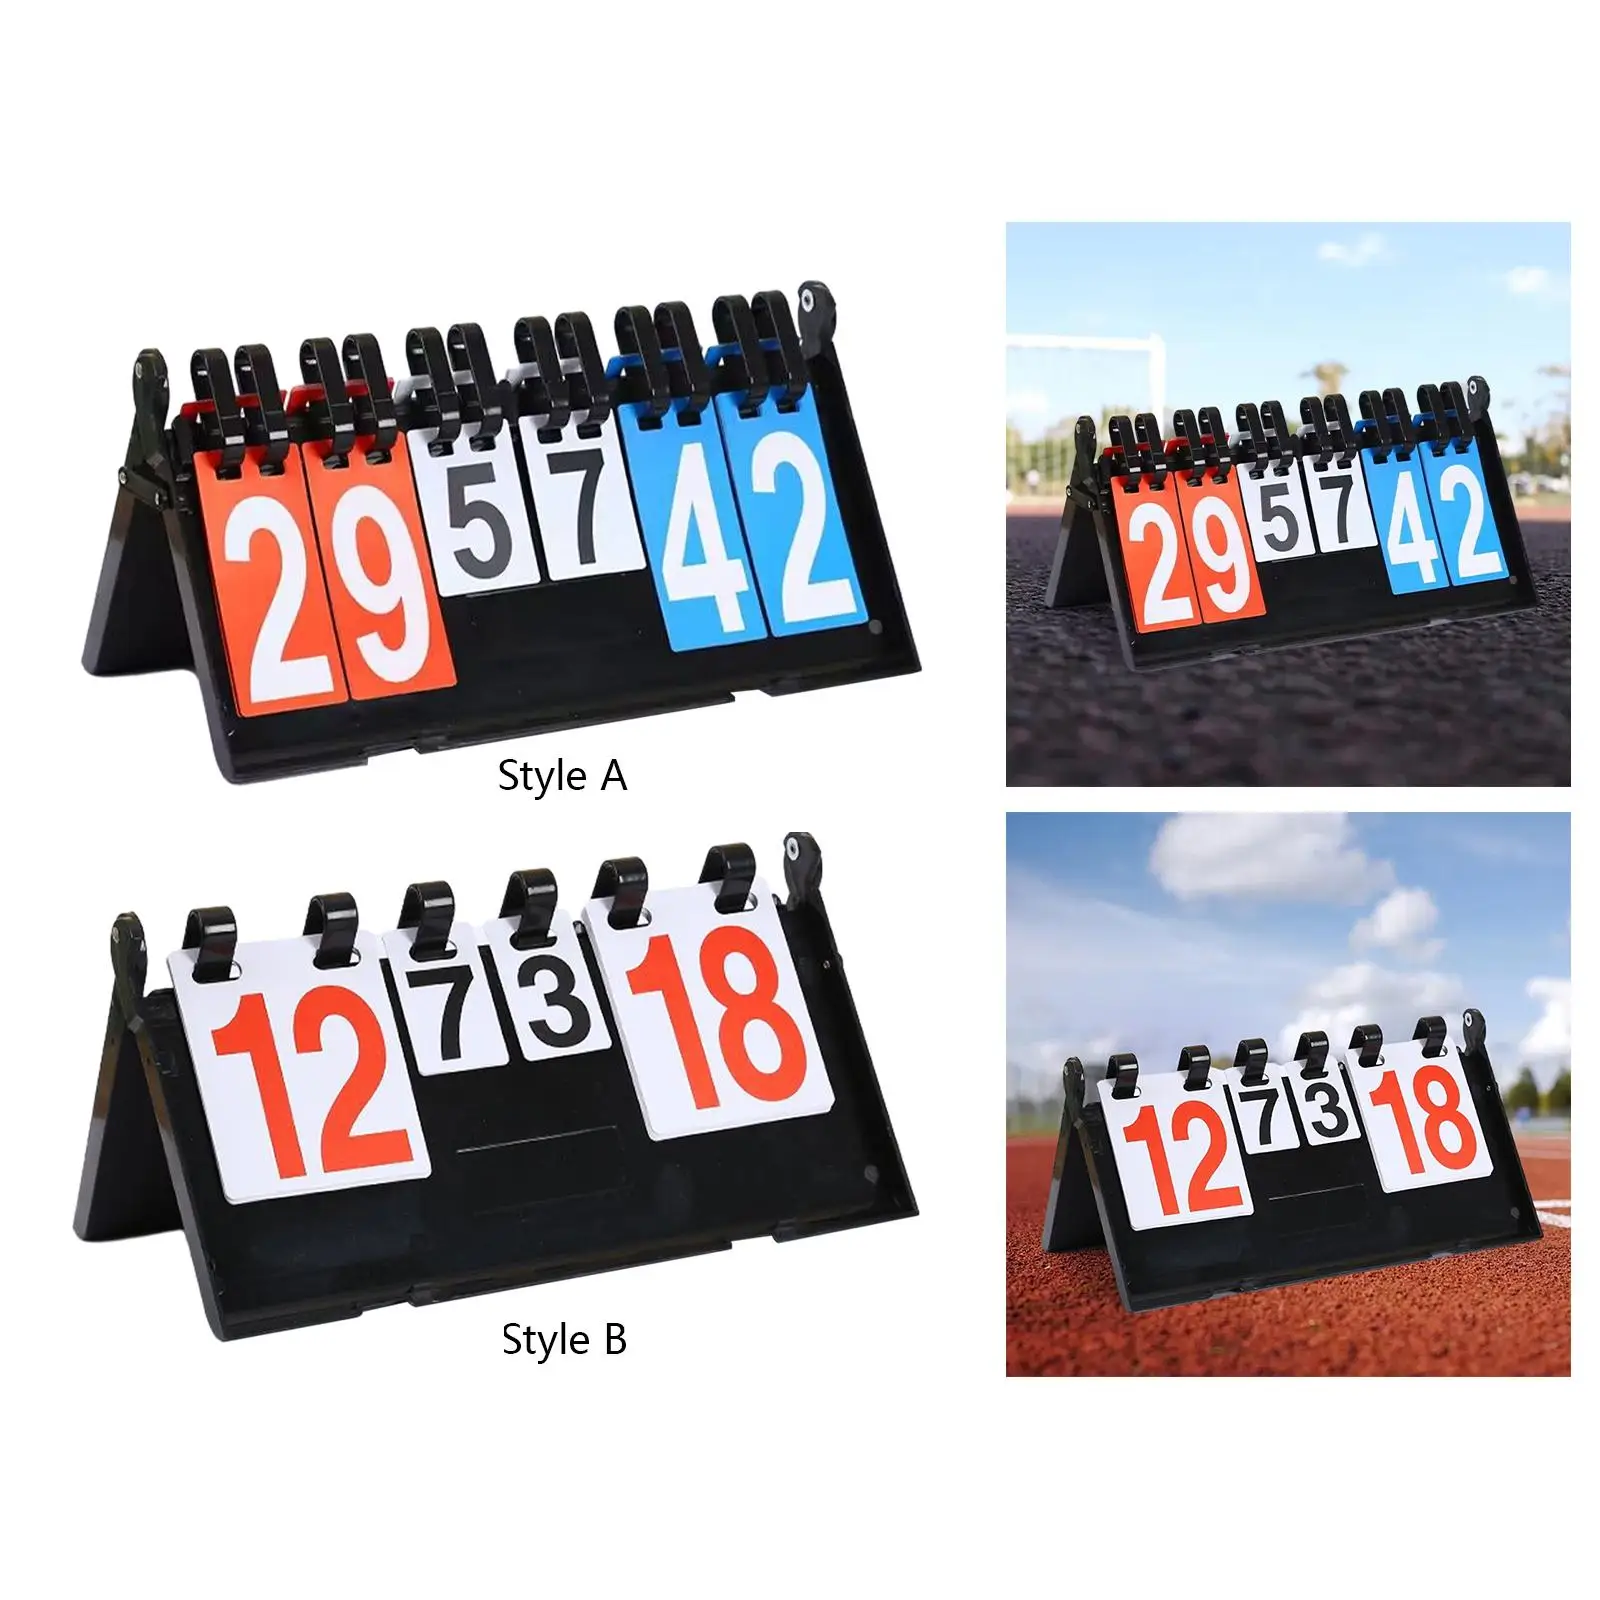 Score Card Flipper Numbers Scoreboard Compact Tabletop Scoreboard for Table Tennis Basketball Volleyball Team Games Billiards